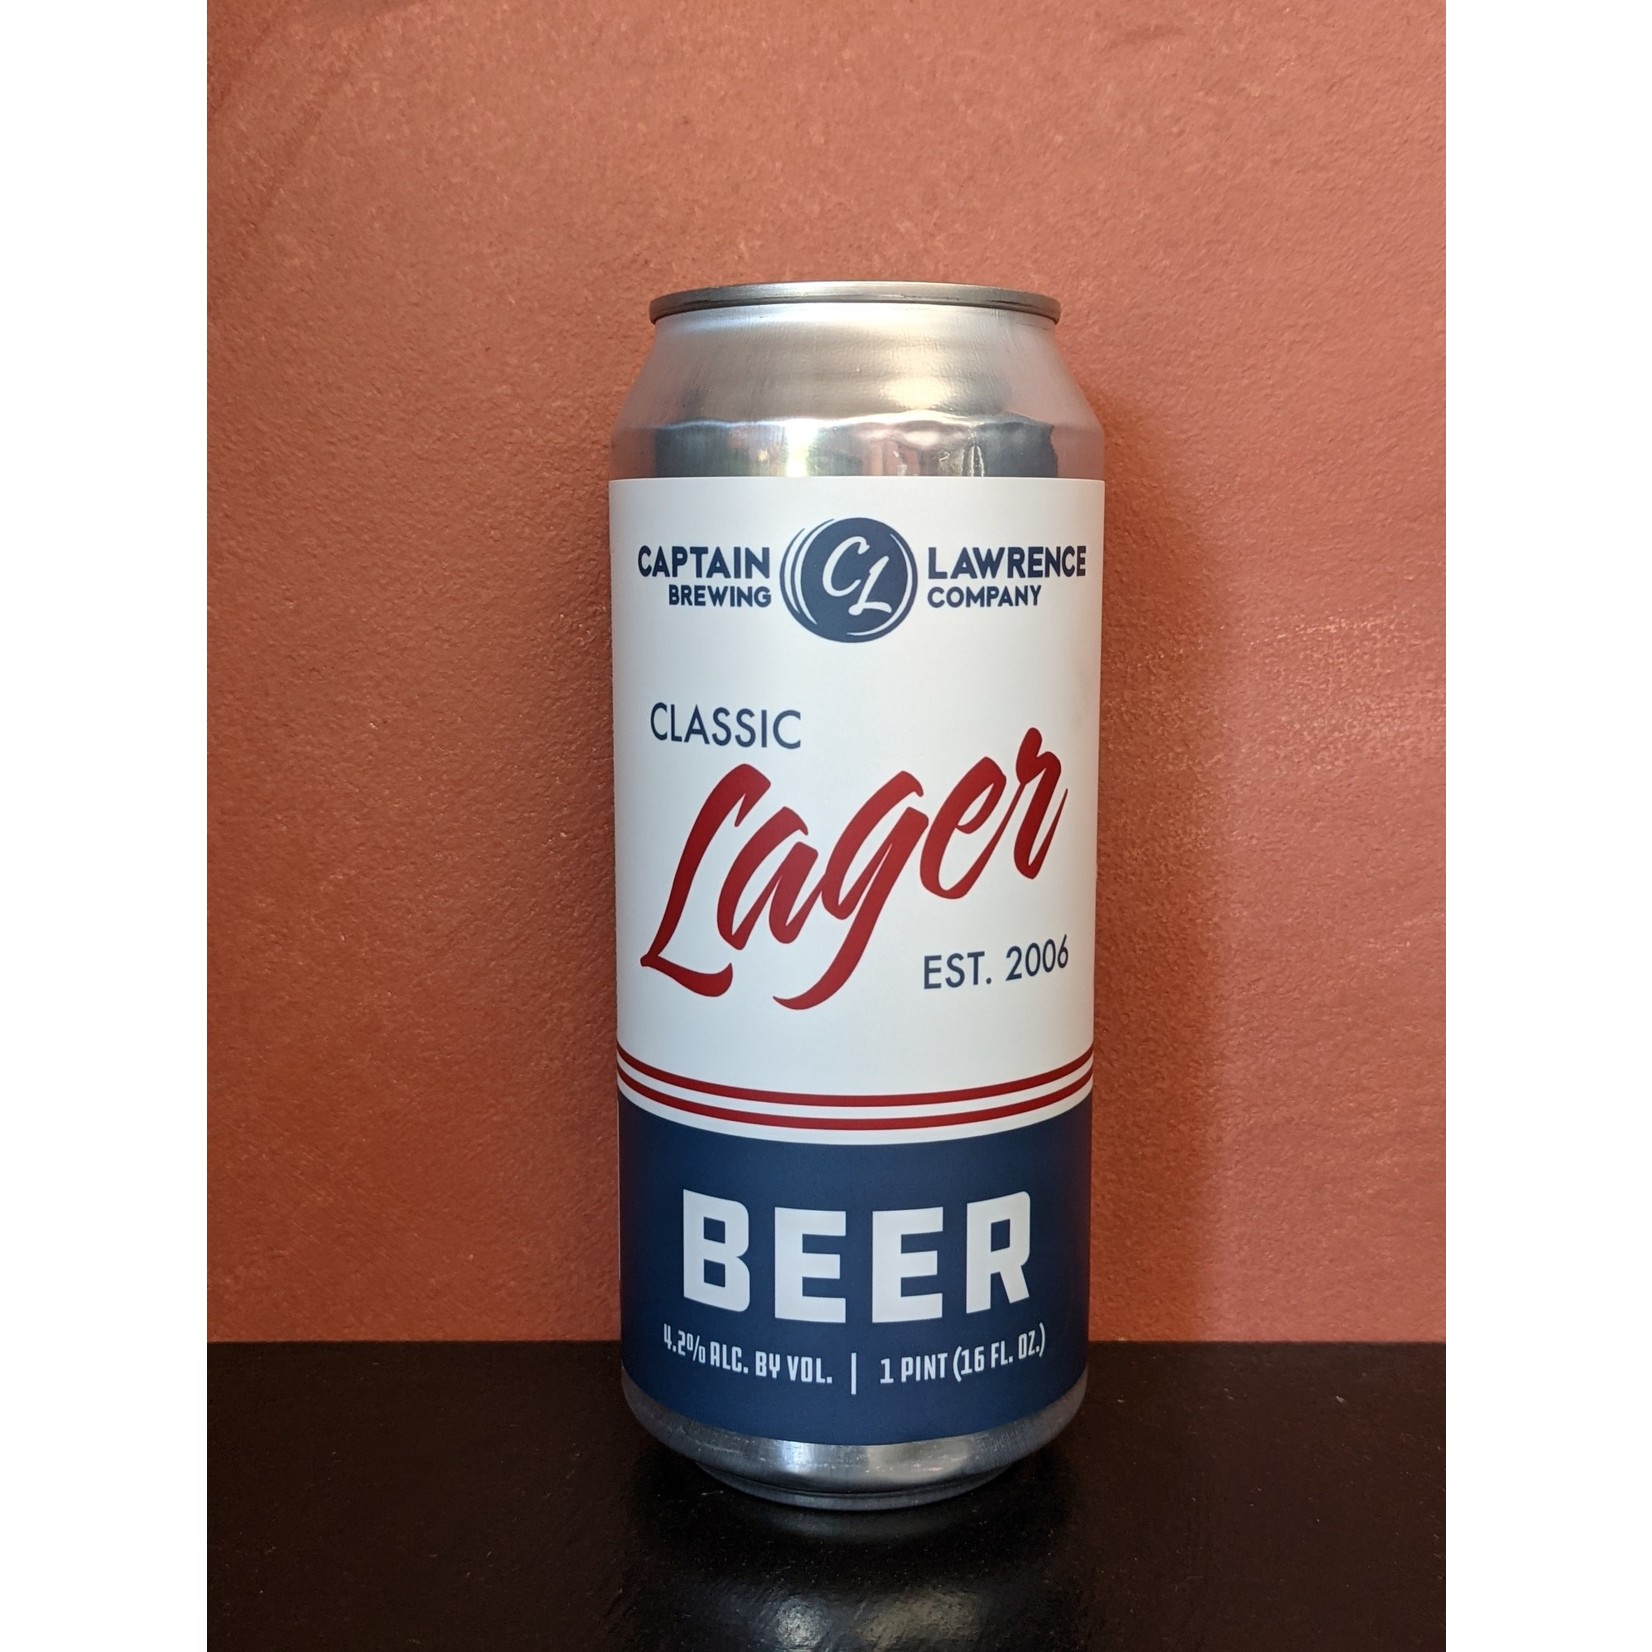 Captain Lawrence "Classic Lager" CAN